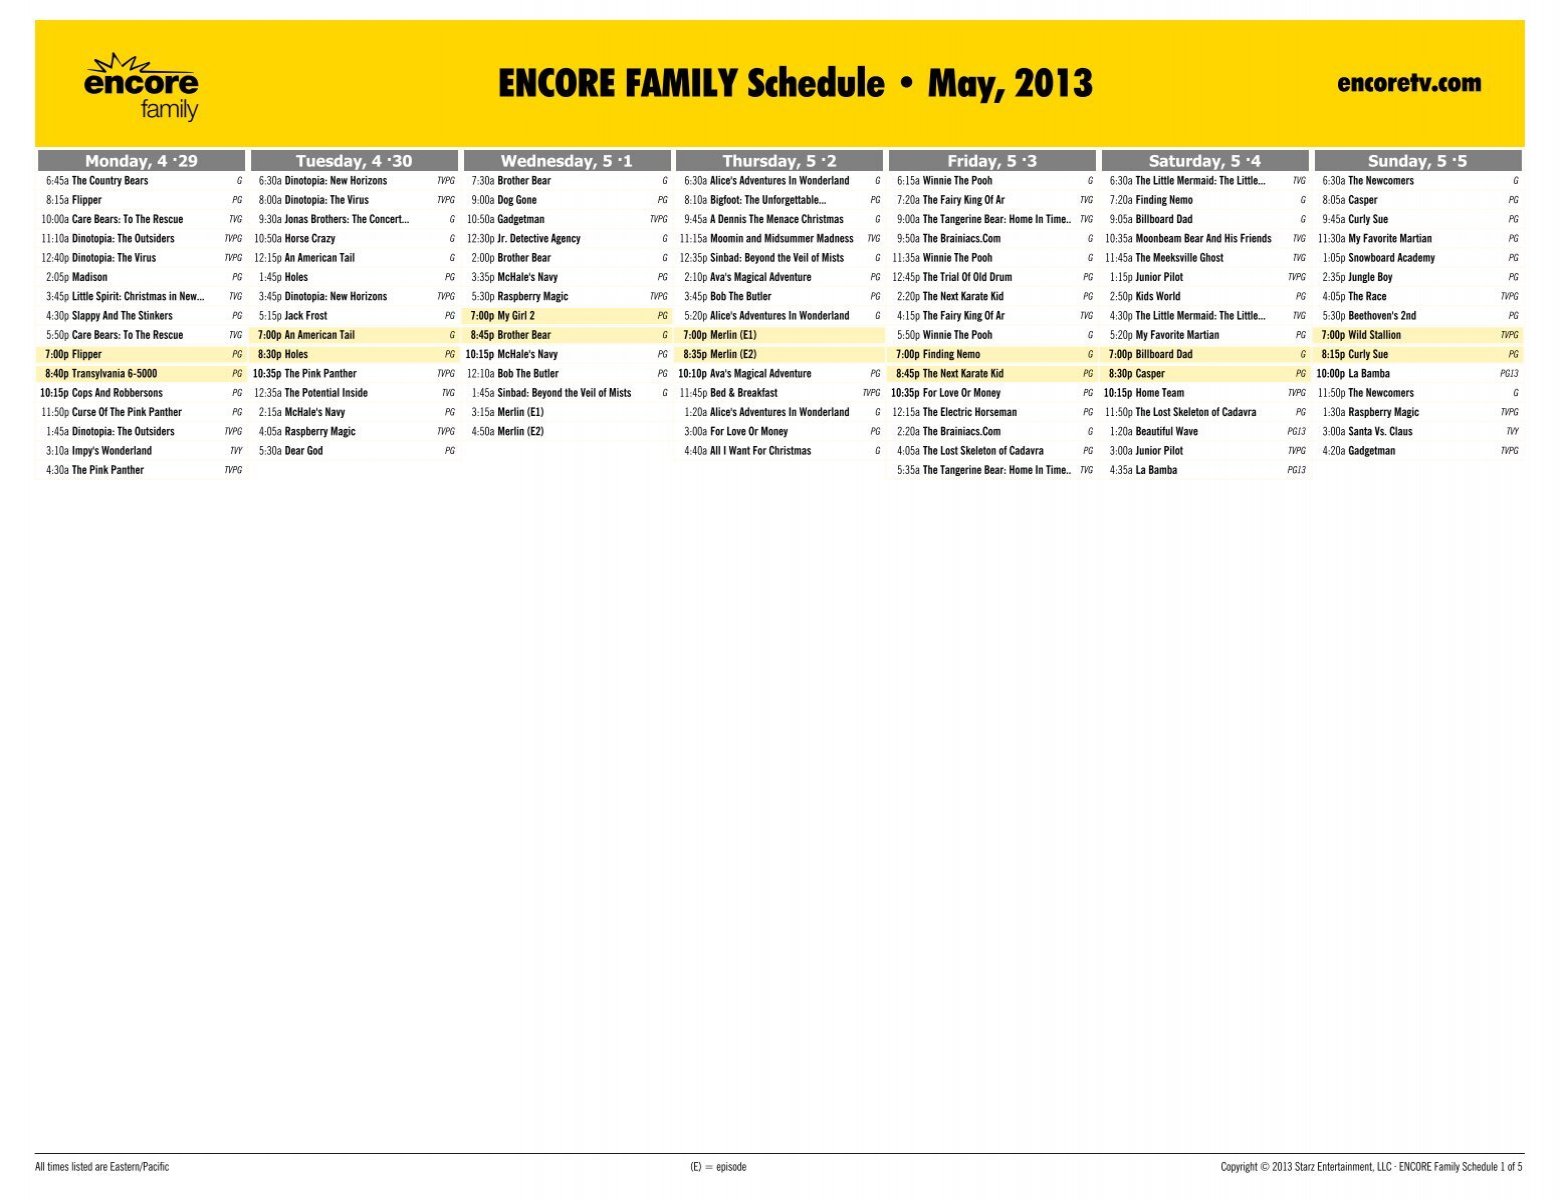 ENCORE FAMILY Schedule - May, 2013 - Starz